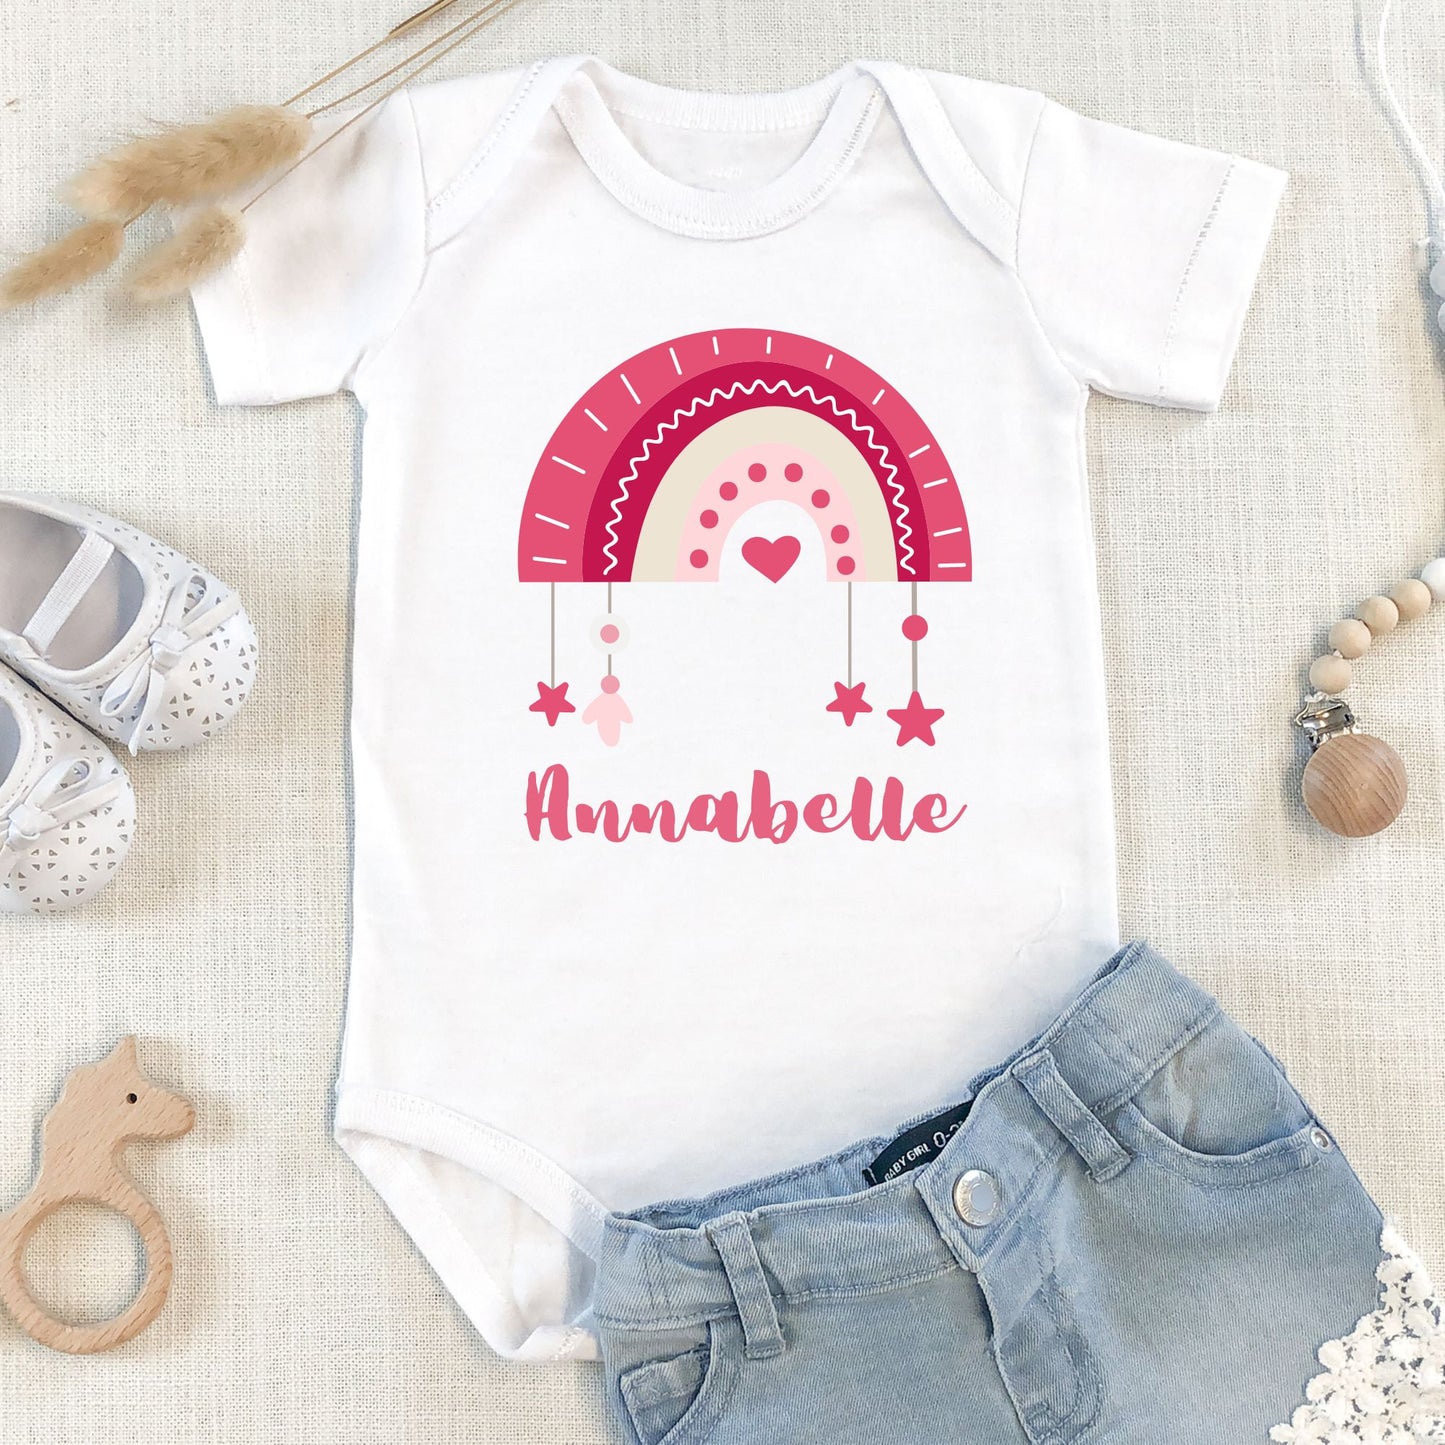 Personalized "Pink Rainbow" Baby Romper